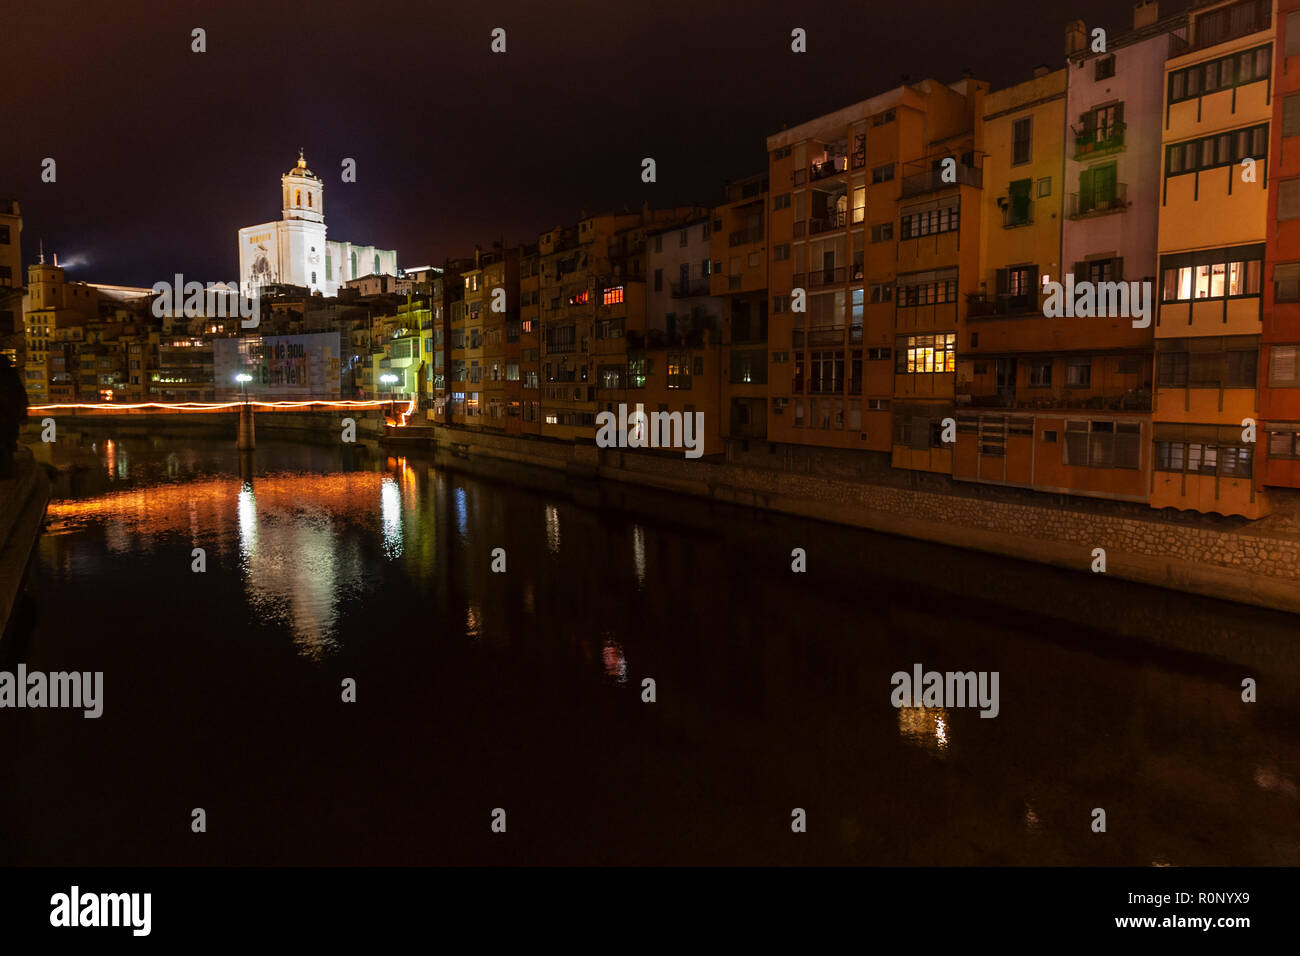 Night vision of the Rio Onyar Ciudad Vieja , Old Town with coloured houses, Girona, Catalonia, Spain Stock Photo